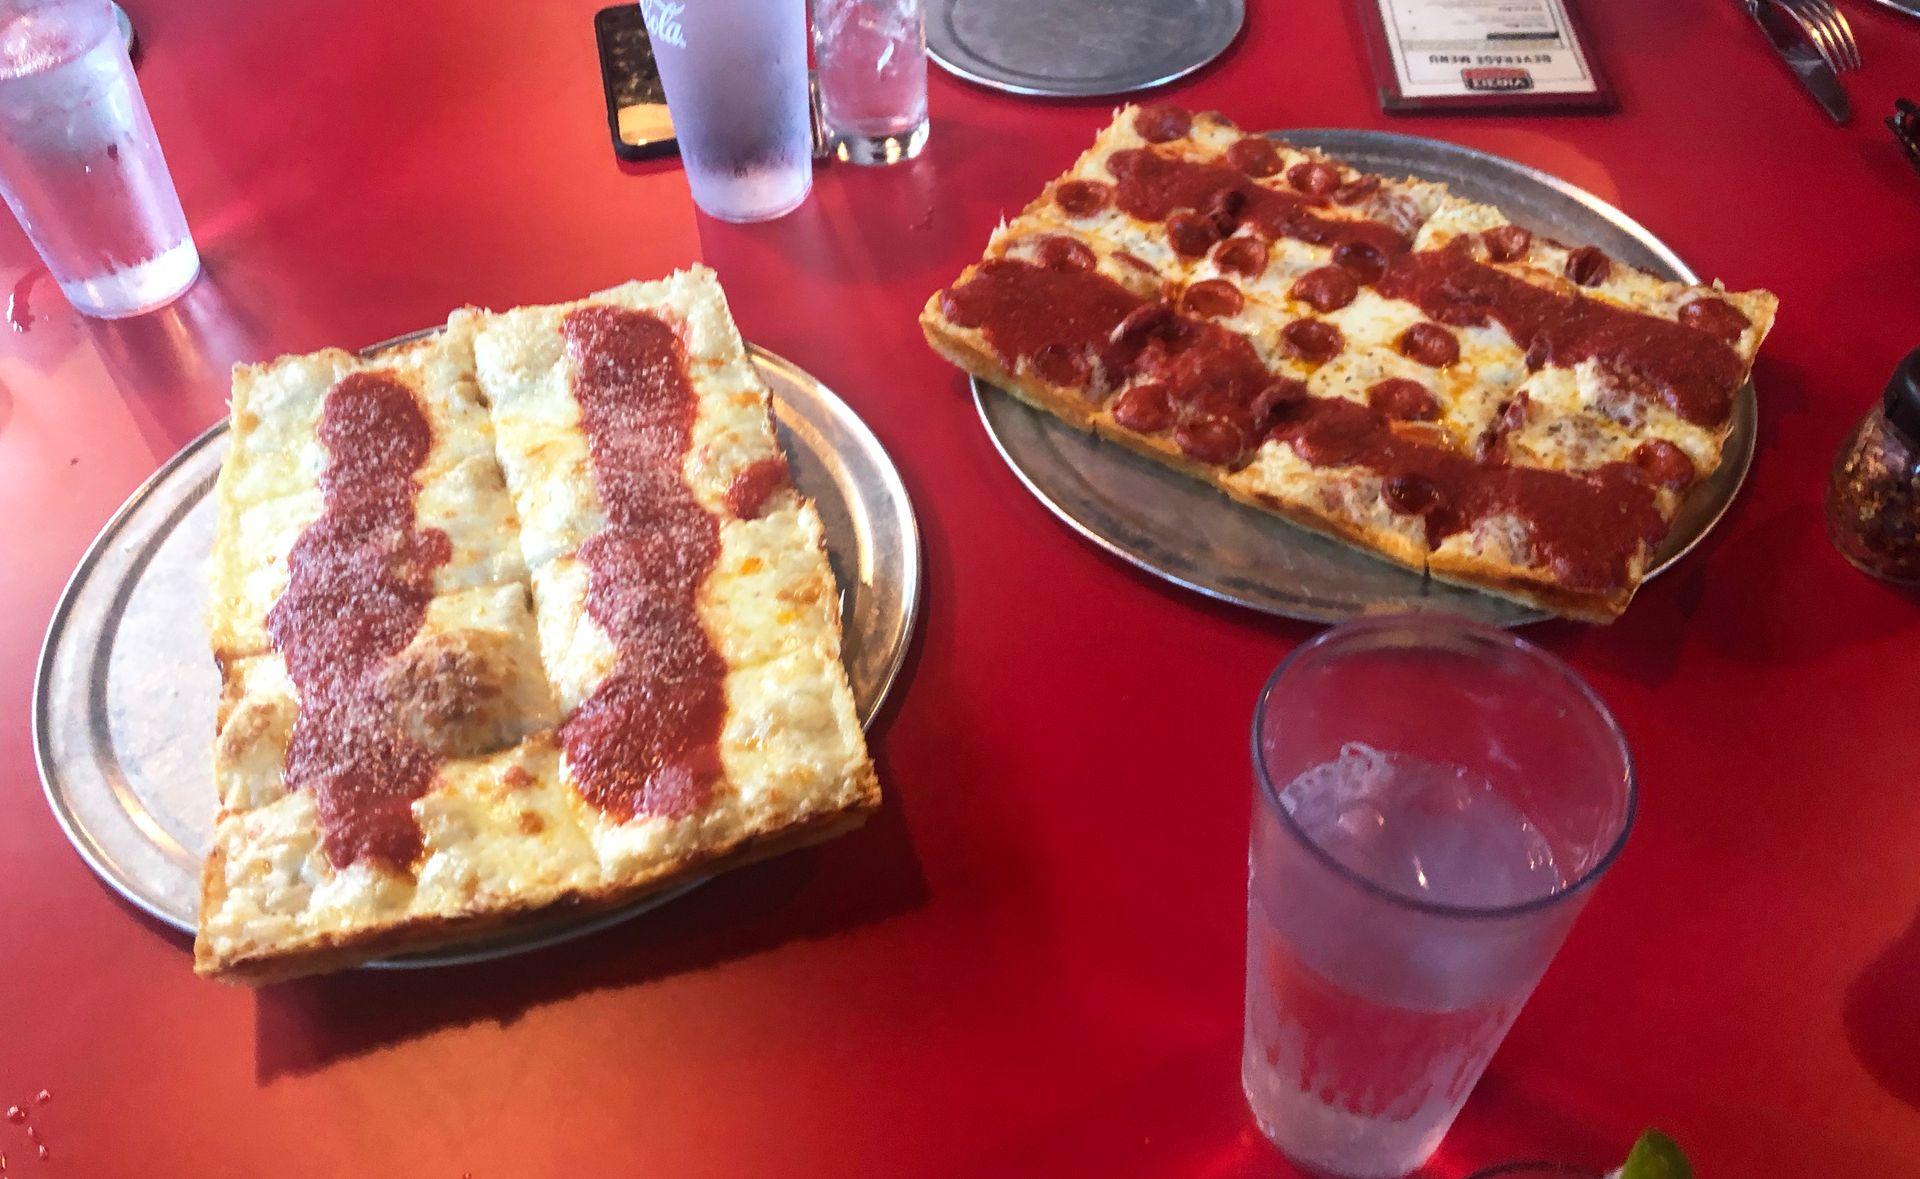 Two plates of detriot-style pizza from Via 313.